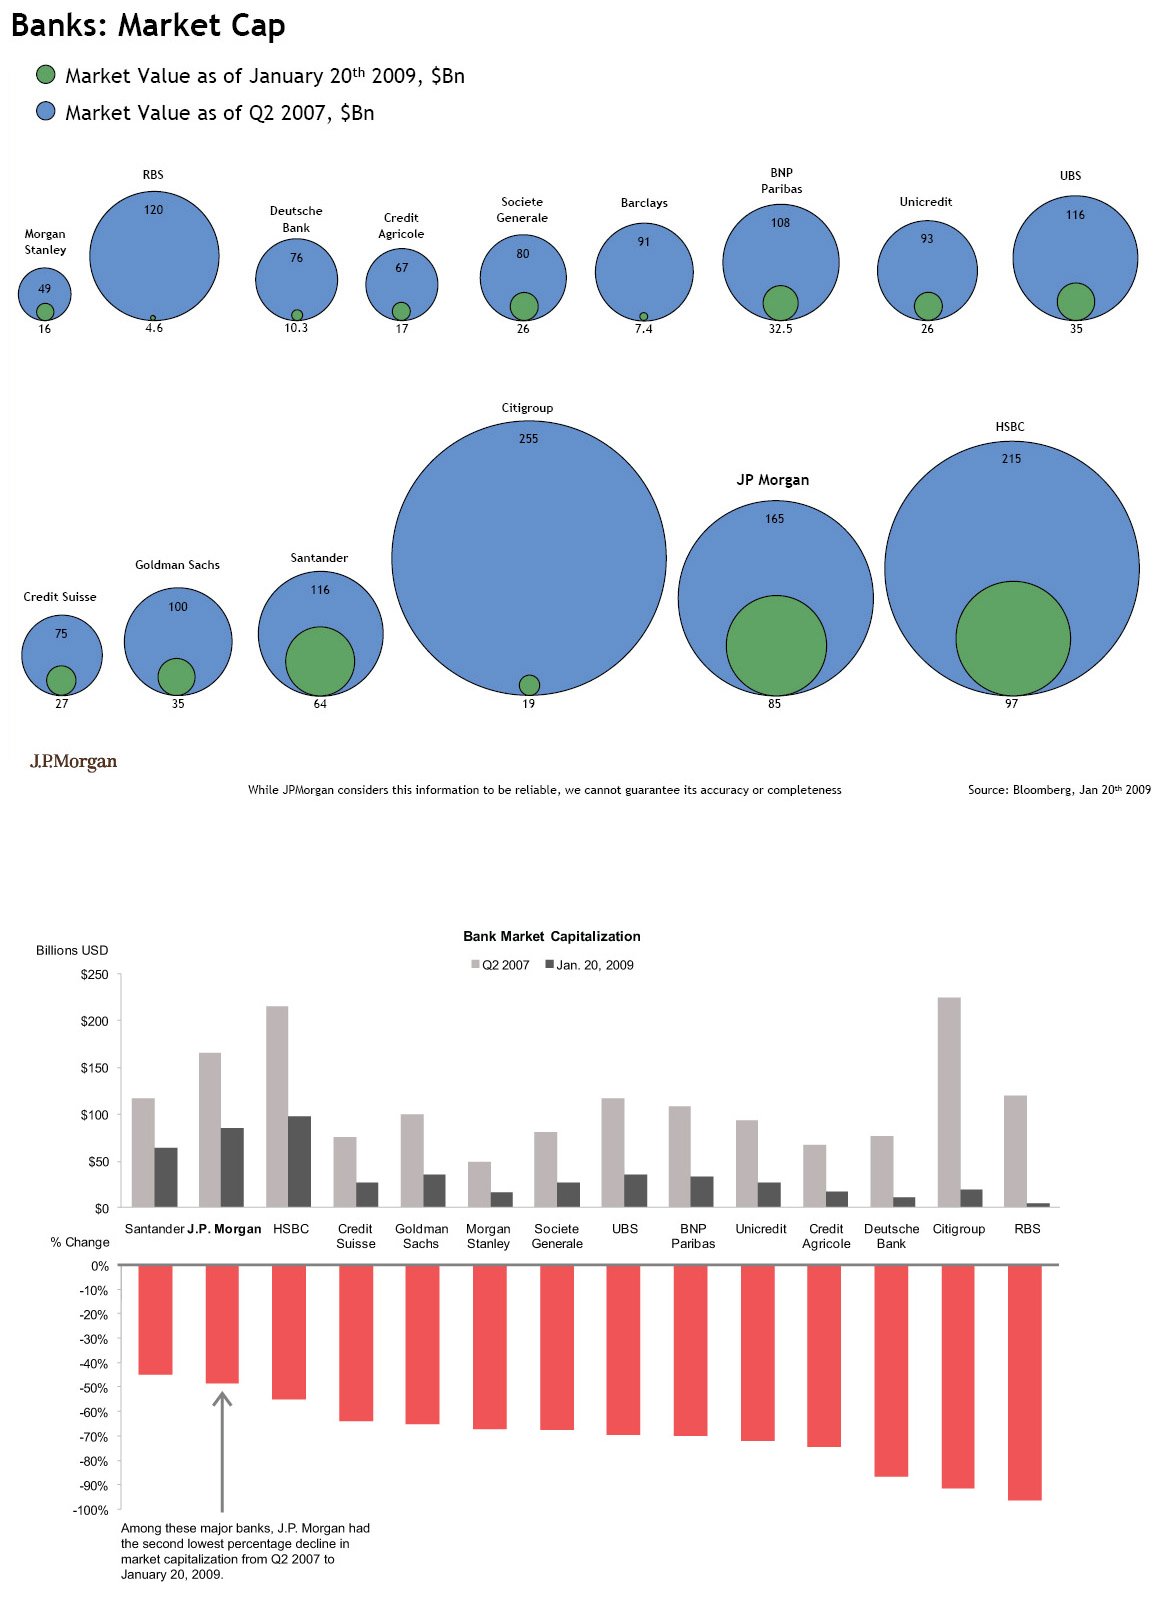 Comparison of Bubble and Bar Charts